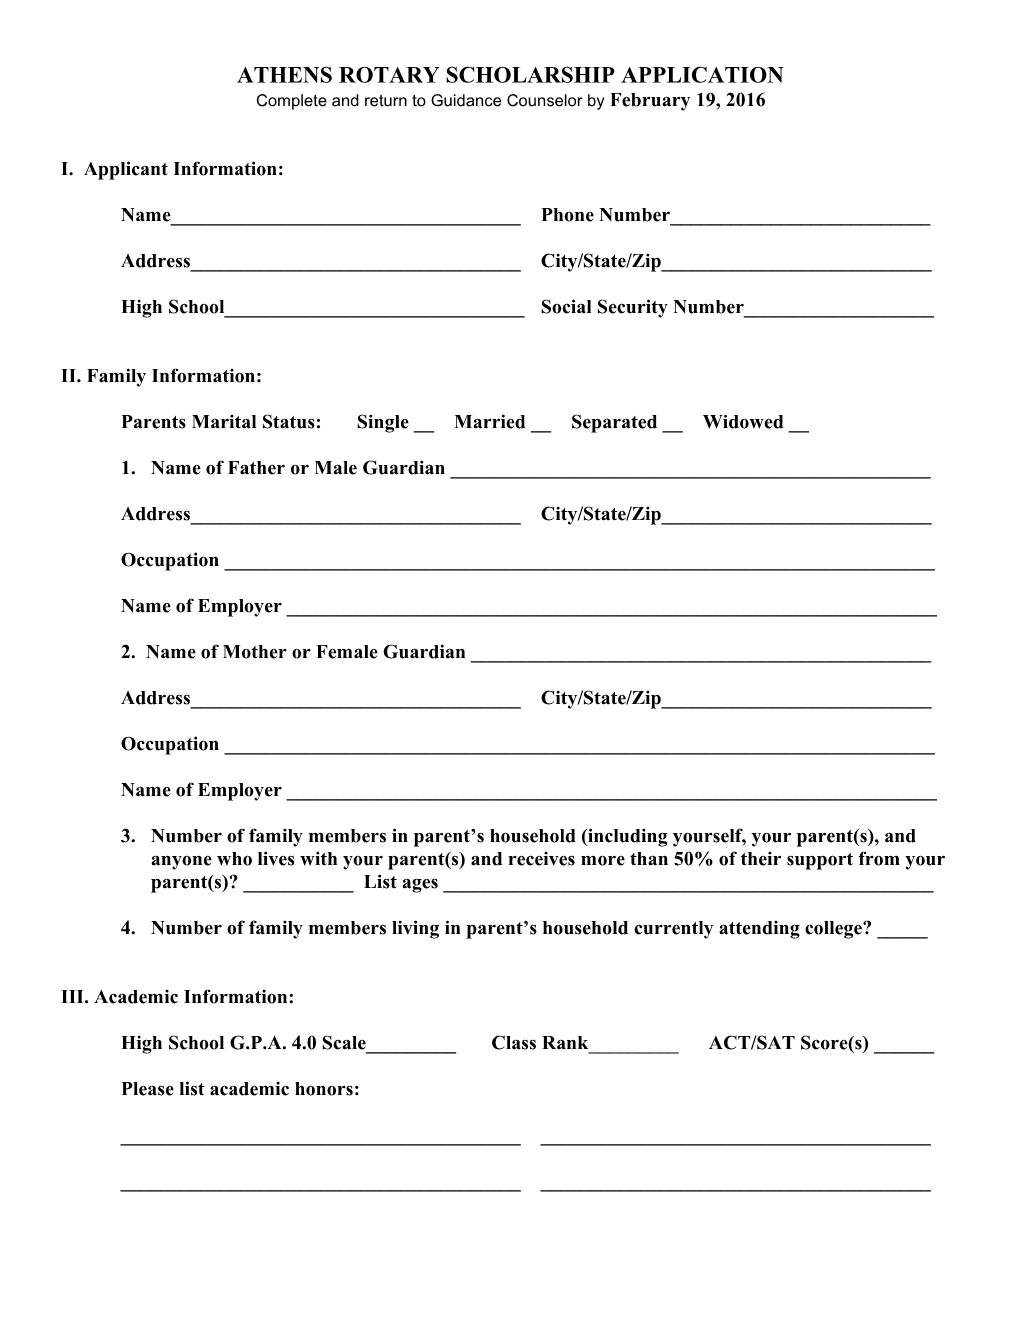 Athens Rotary Lawrence Worstell Scholarship Application